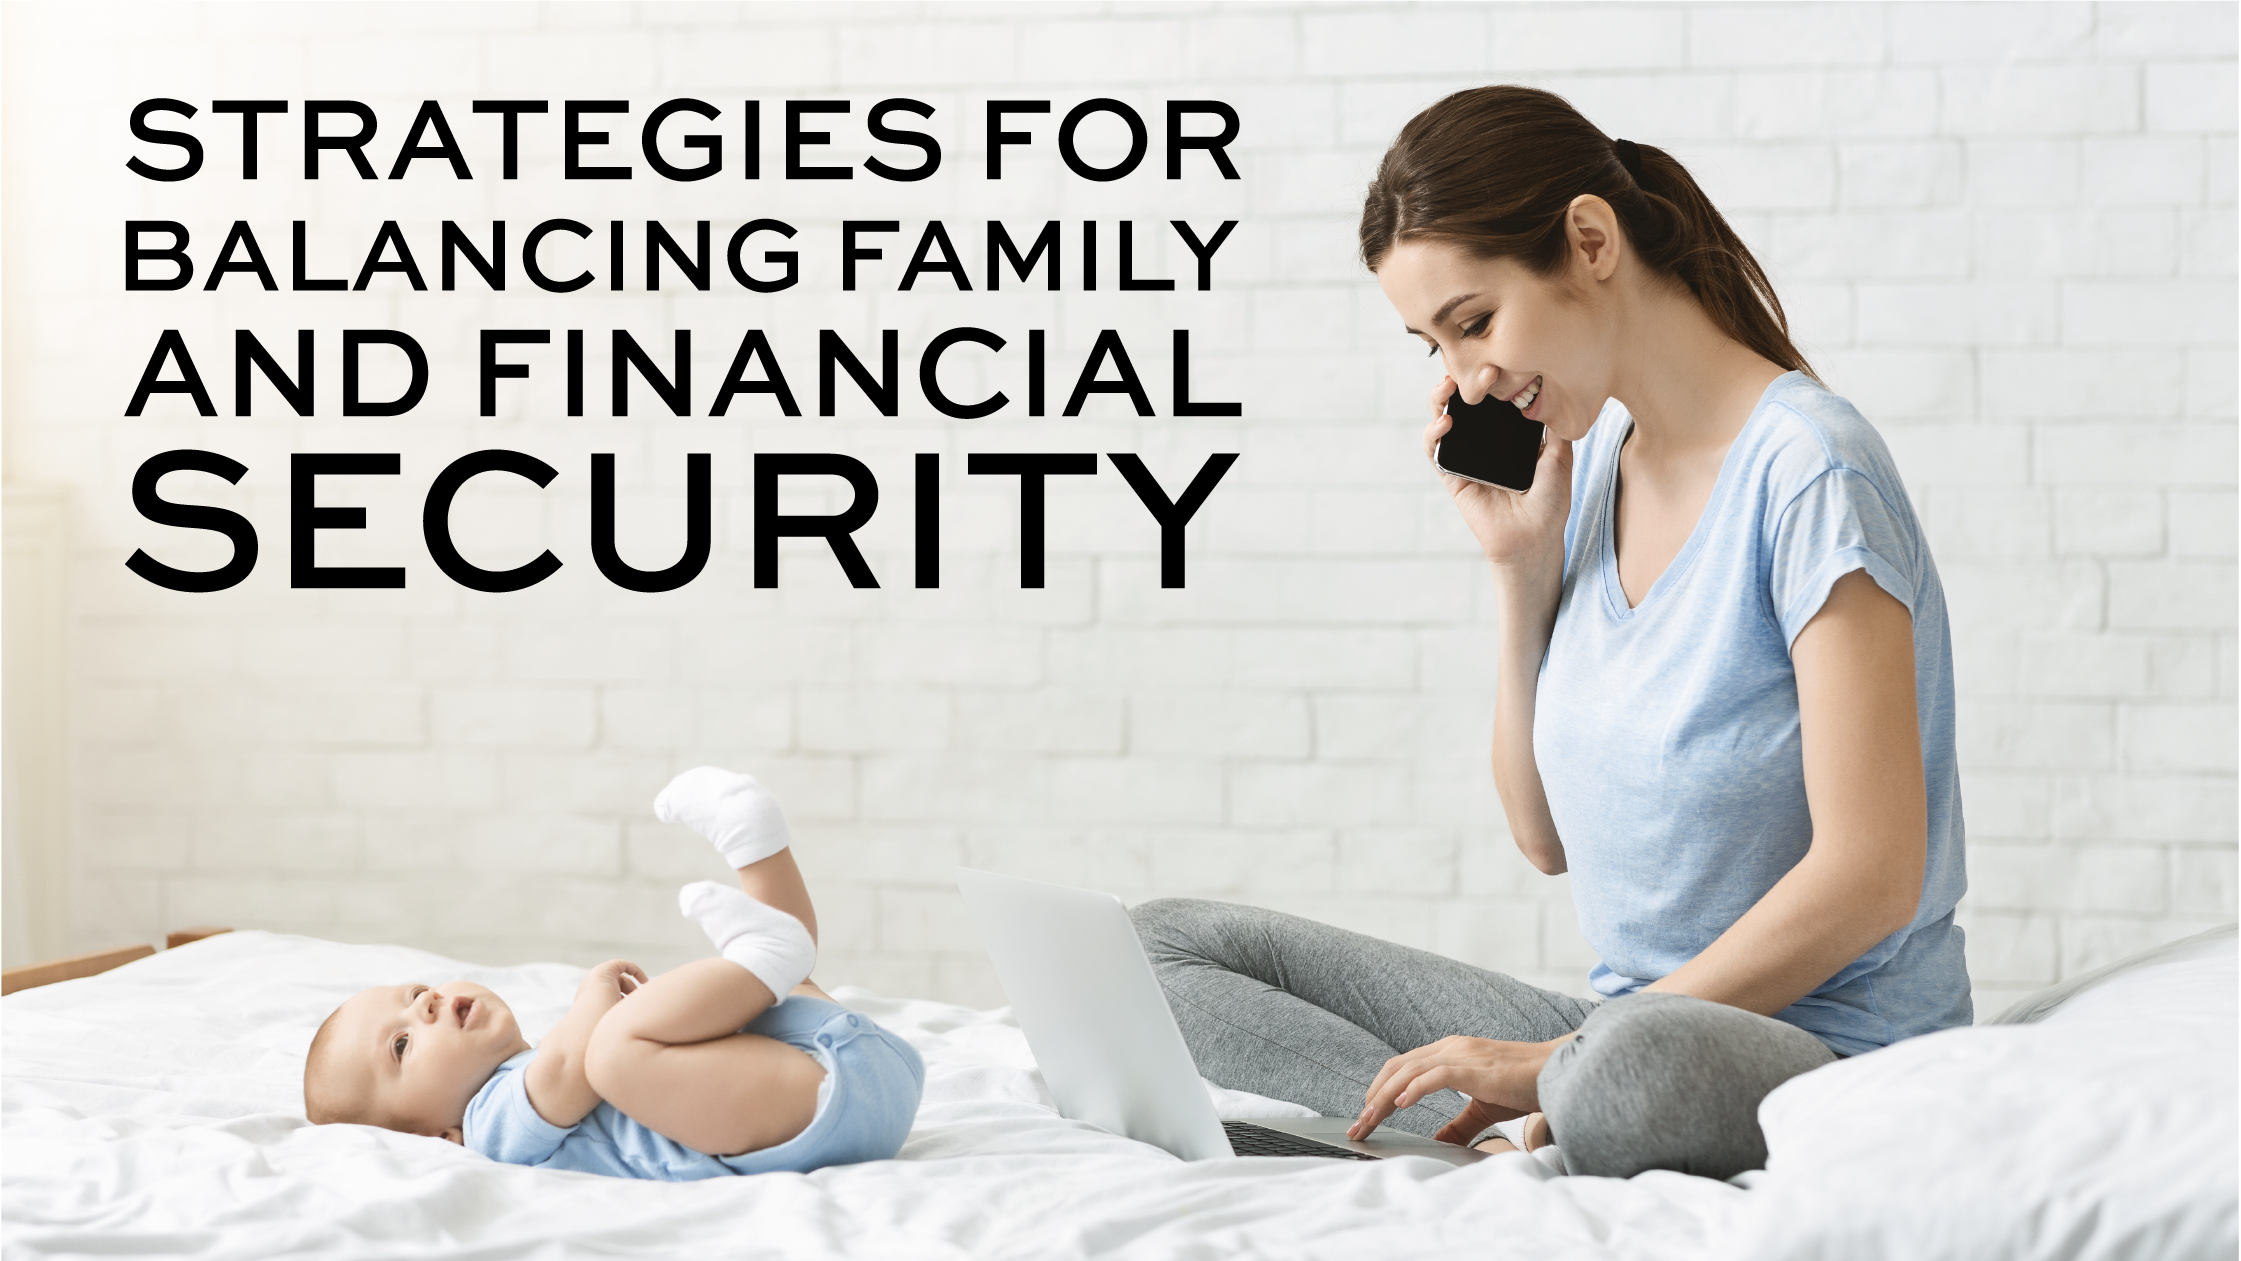 What Is Financial Security and How Do You Achieve It?